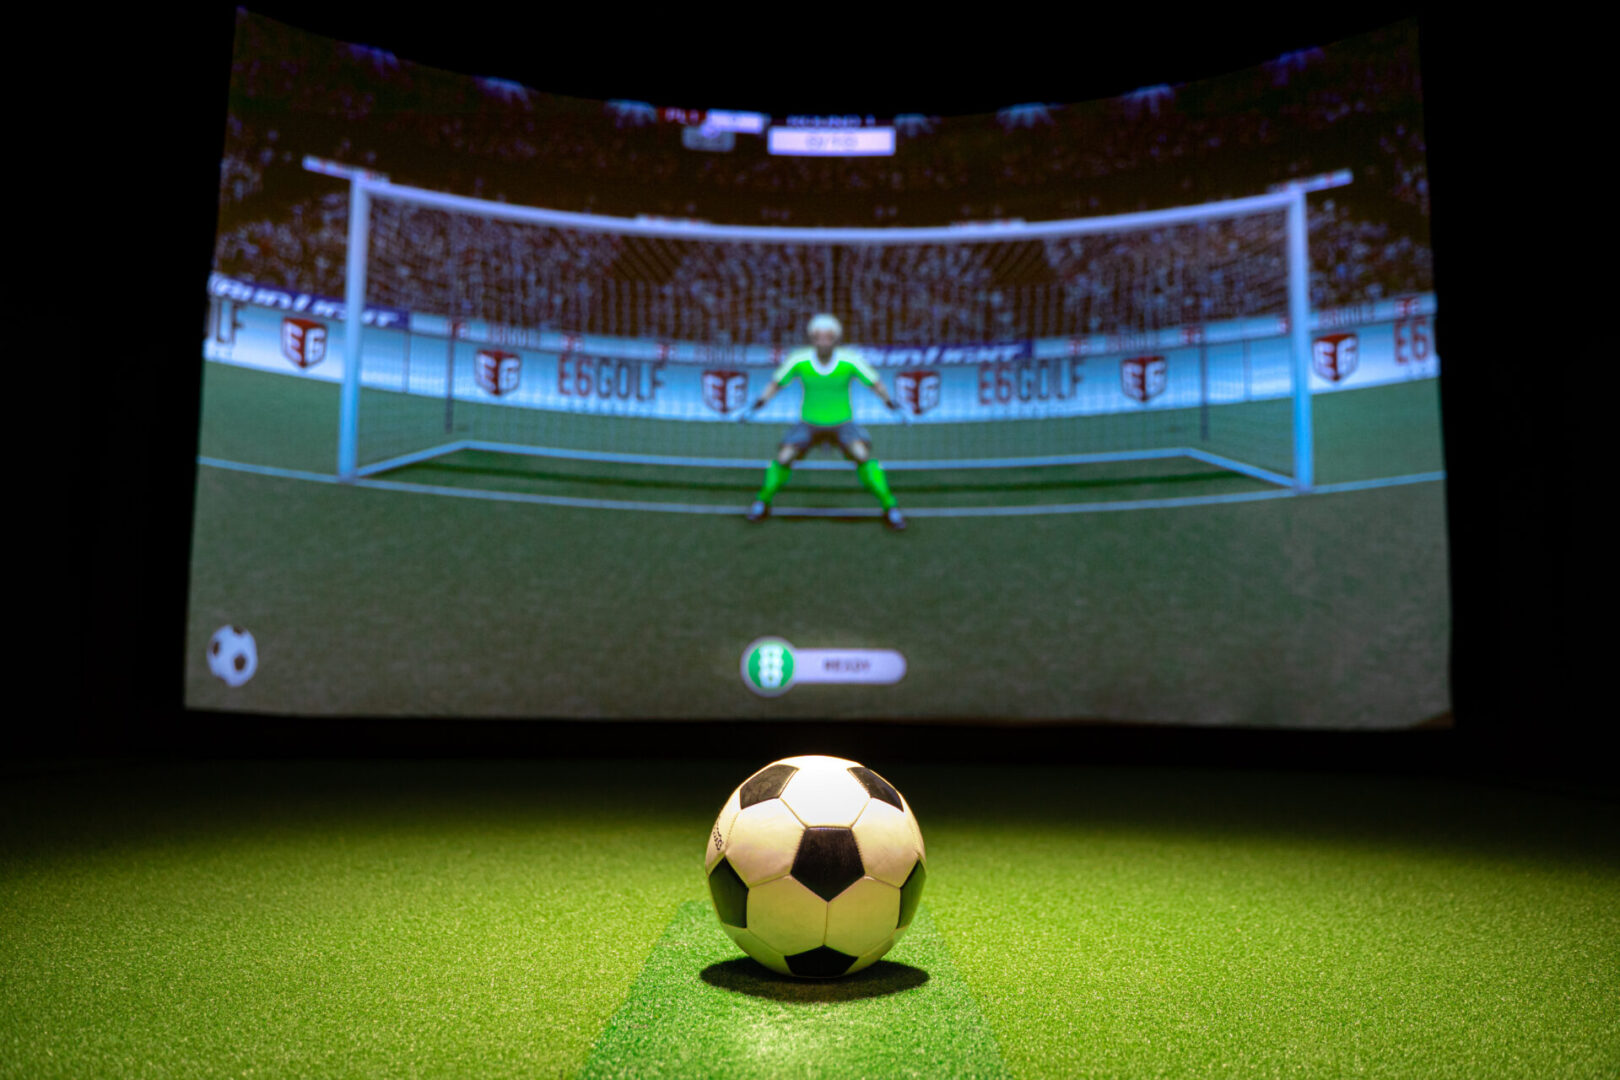 An image of a soccer goal in front of a screen.